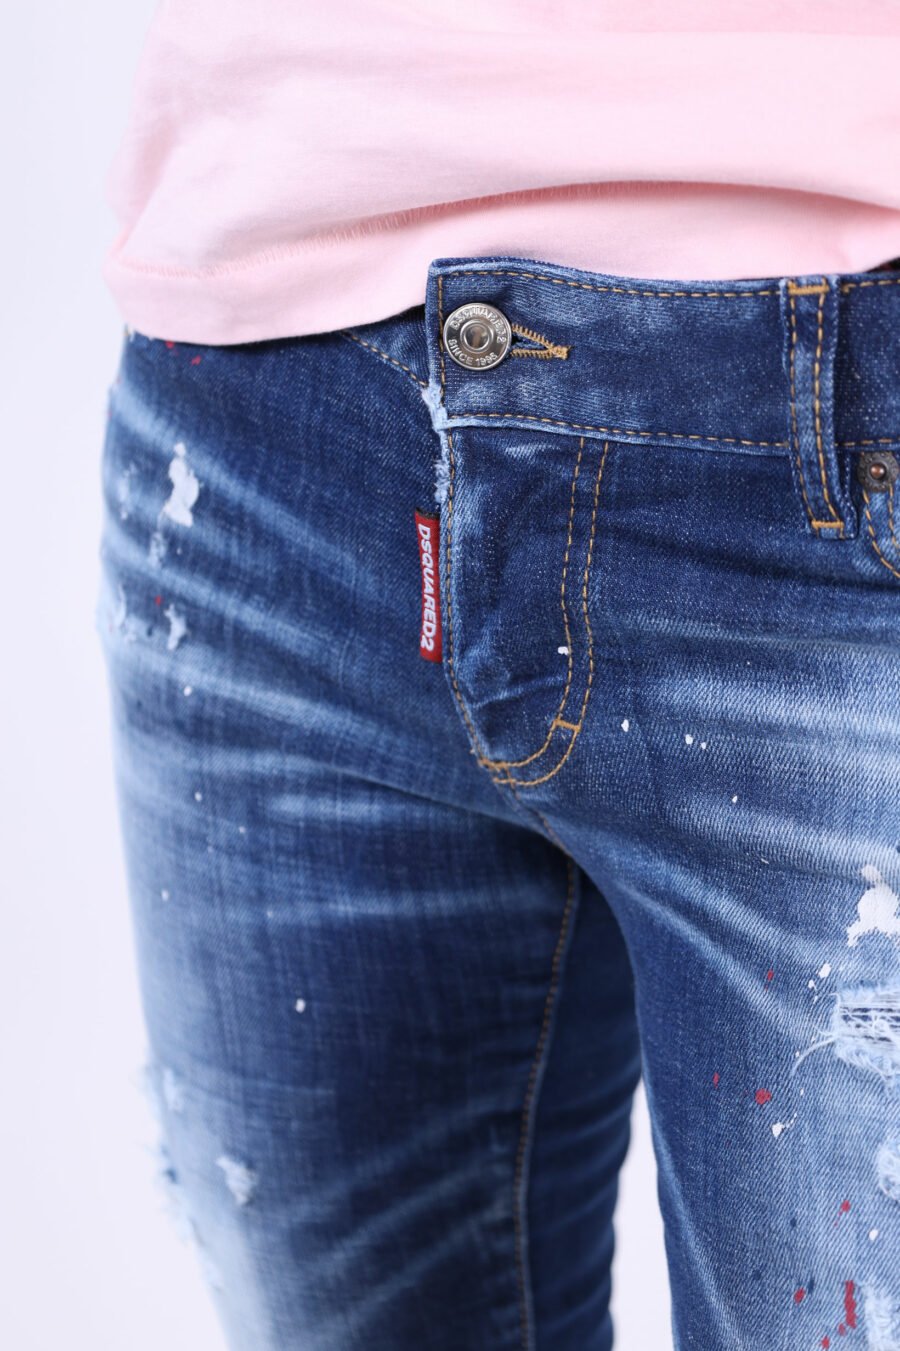 Jeans "Jennifer Jean" blue with splash paint and faded effect - 361223054662201903